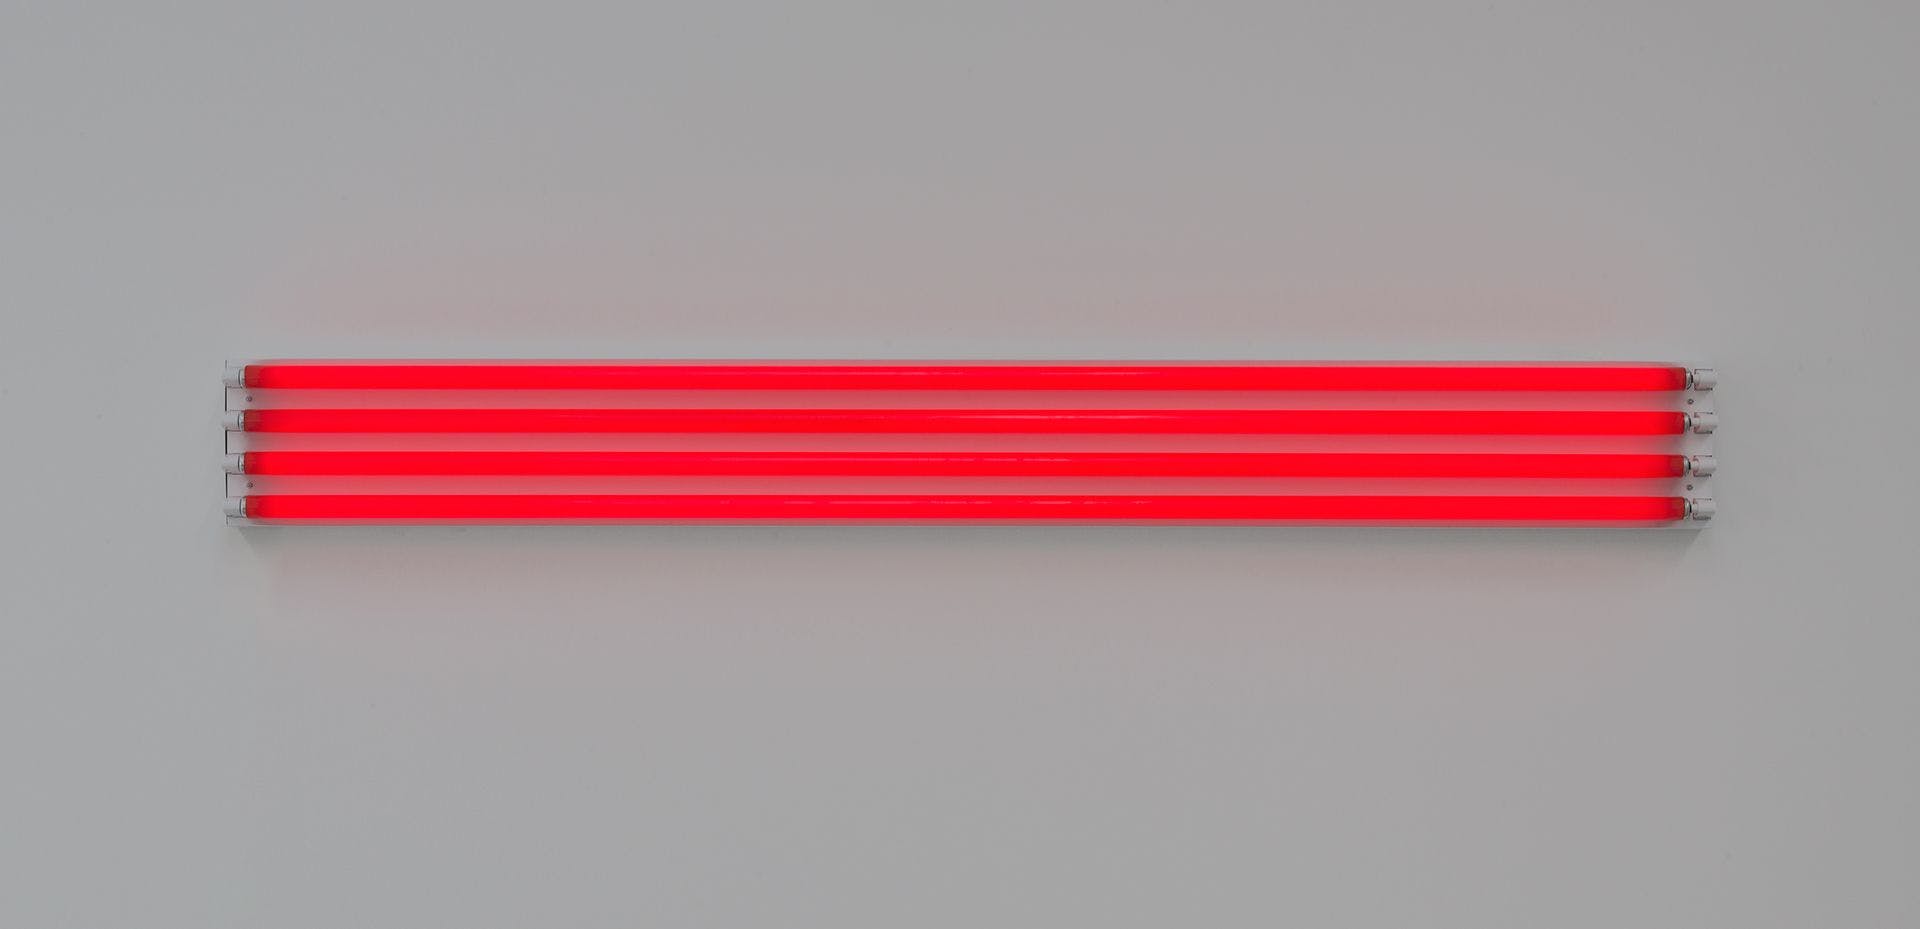 A sculpture by Dan Flavin, titled four red horizontals (to Sonja), dated 1963.